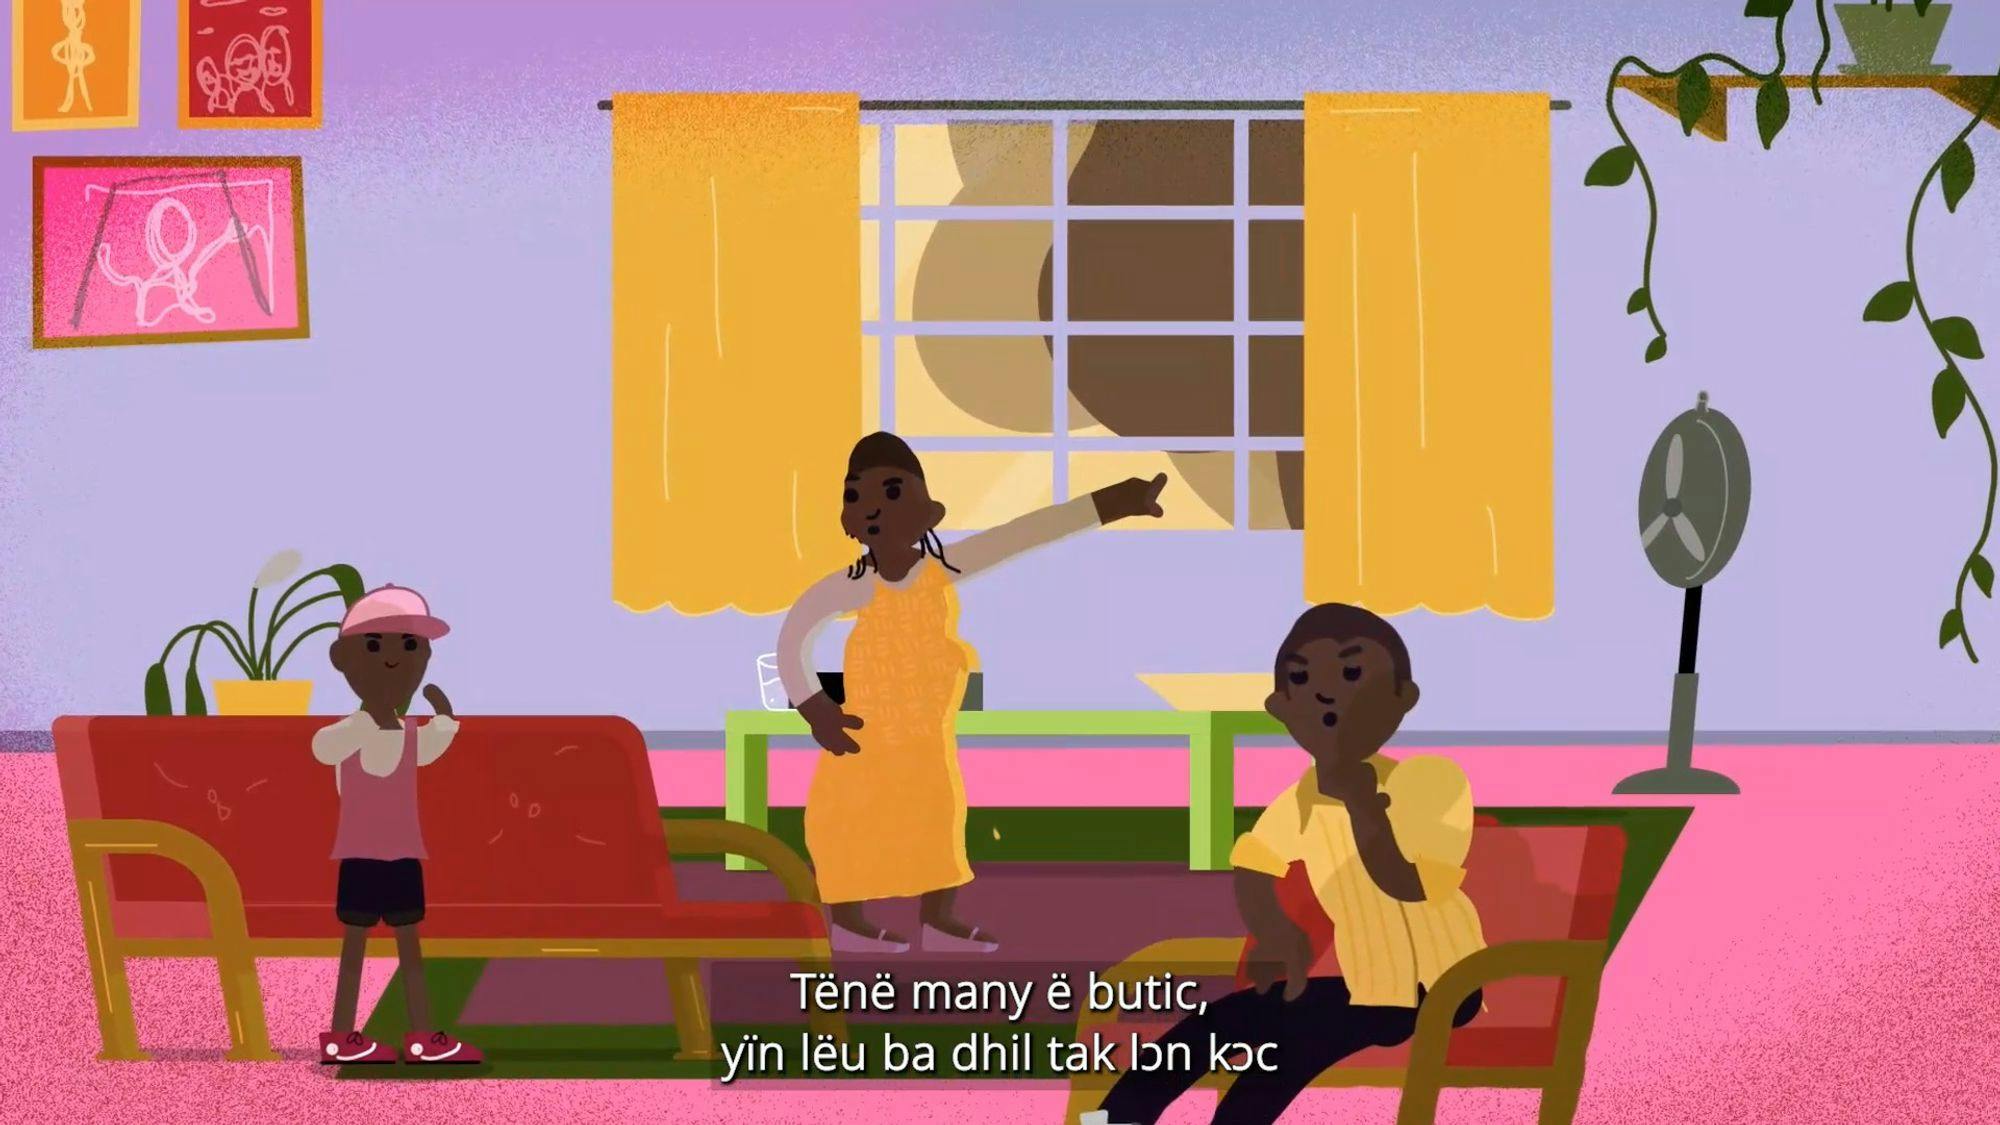 In-language bushfire education animations for CALD communities